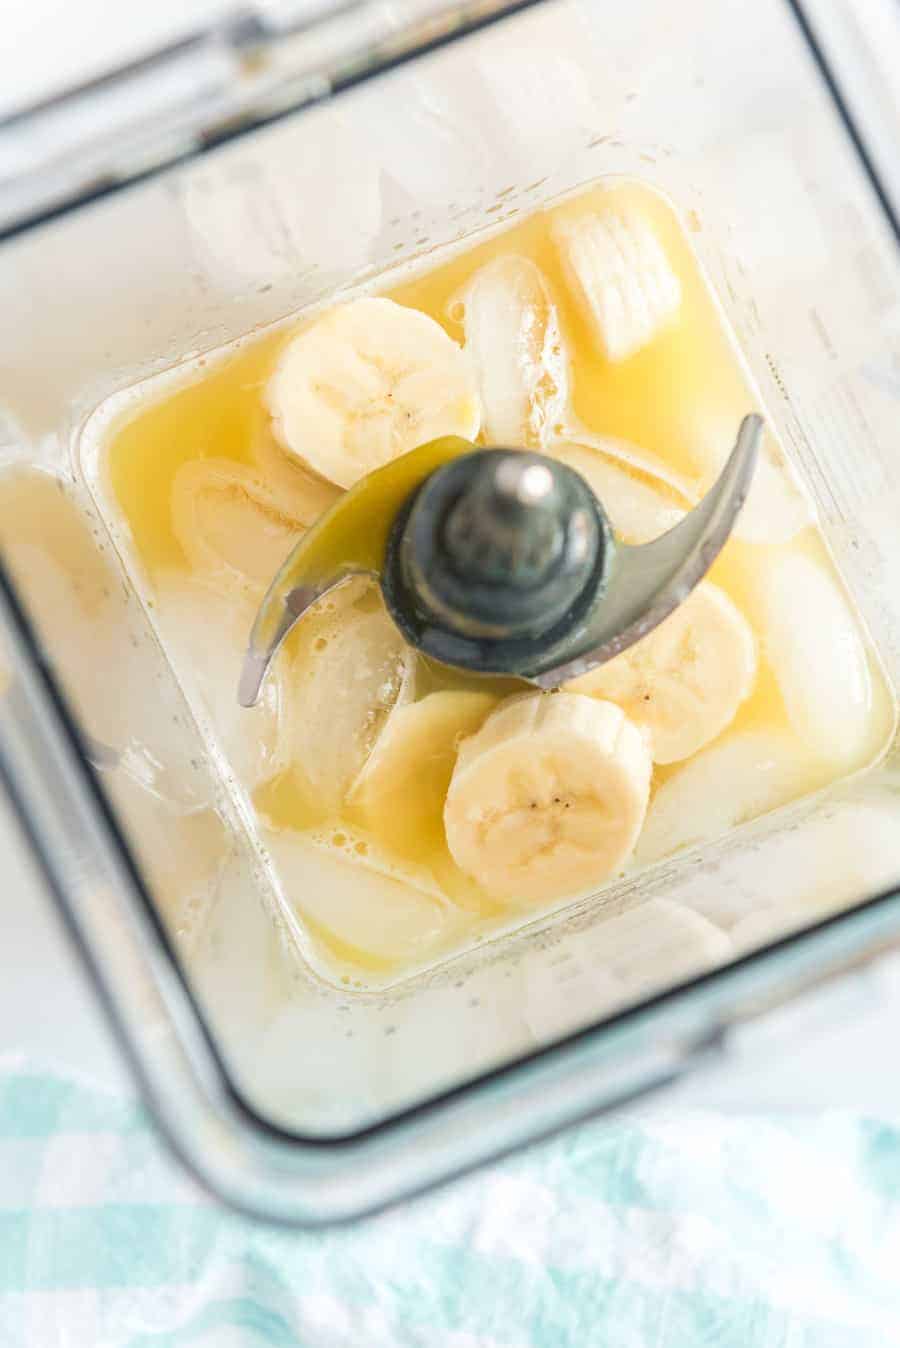 You can't go wrong with the refreshing and tropical flavors of this orange pineapple banana smoothie! #smoothie #fruitsmoothie #tropicalsmoothie #orange #pineapple #banana